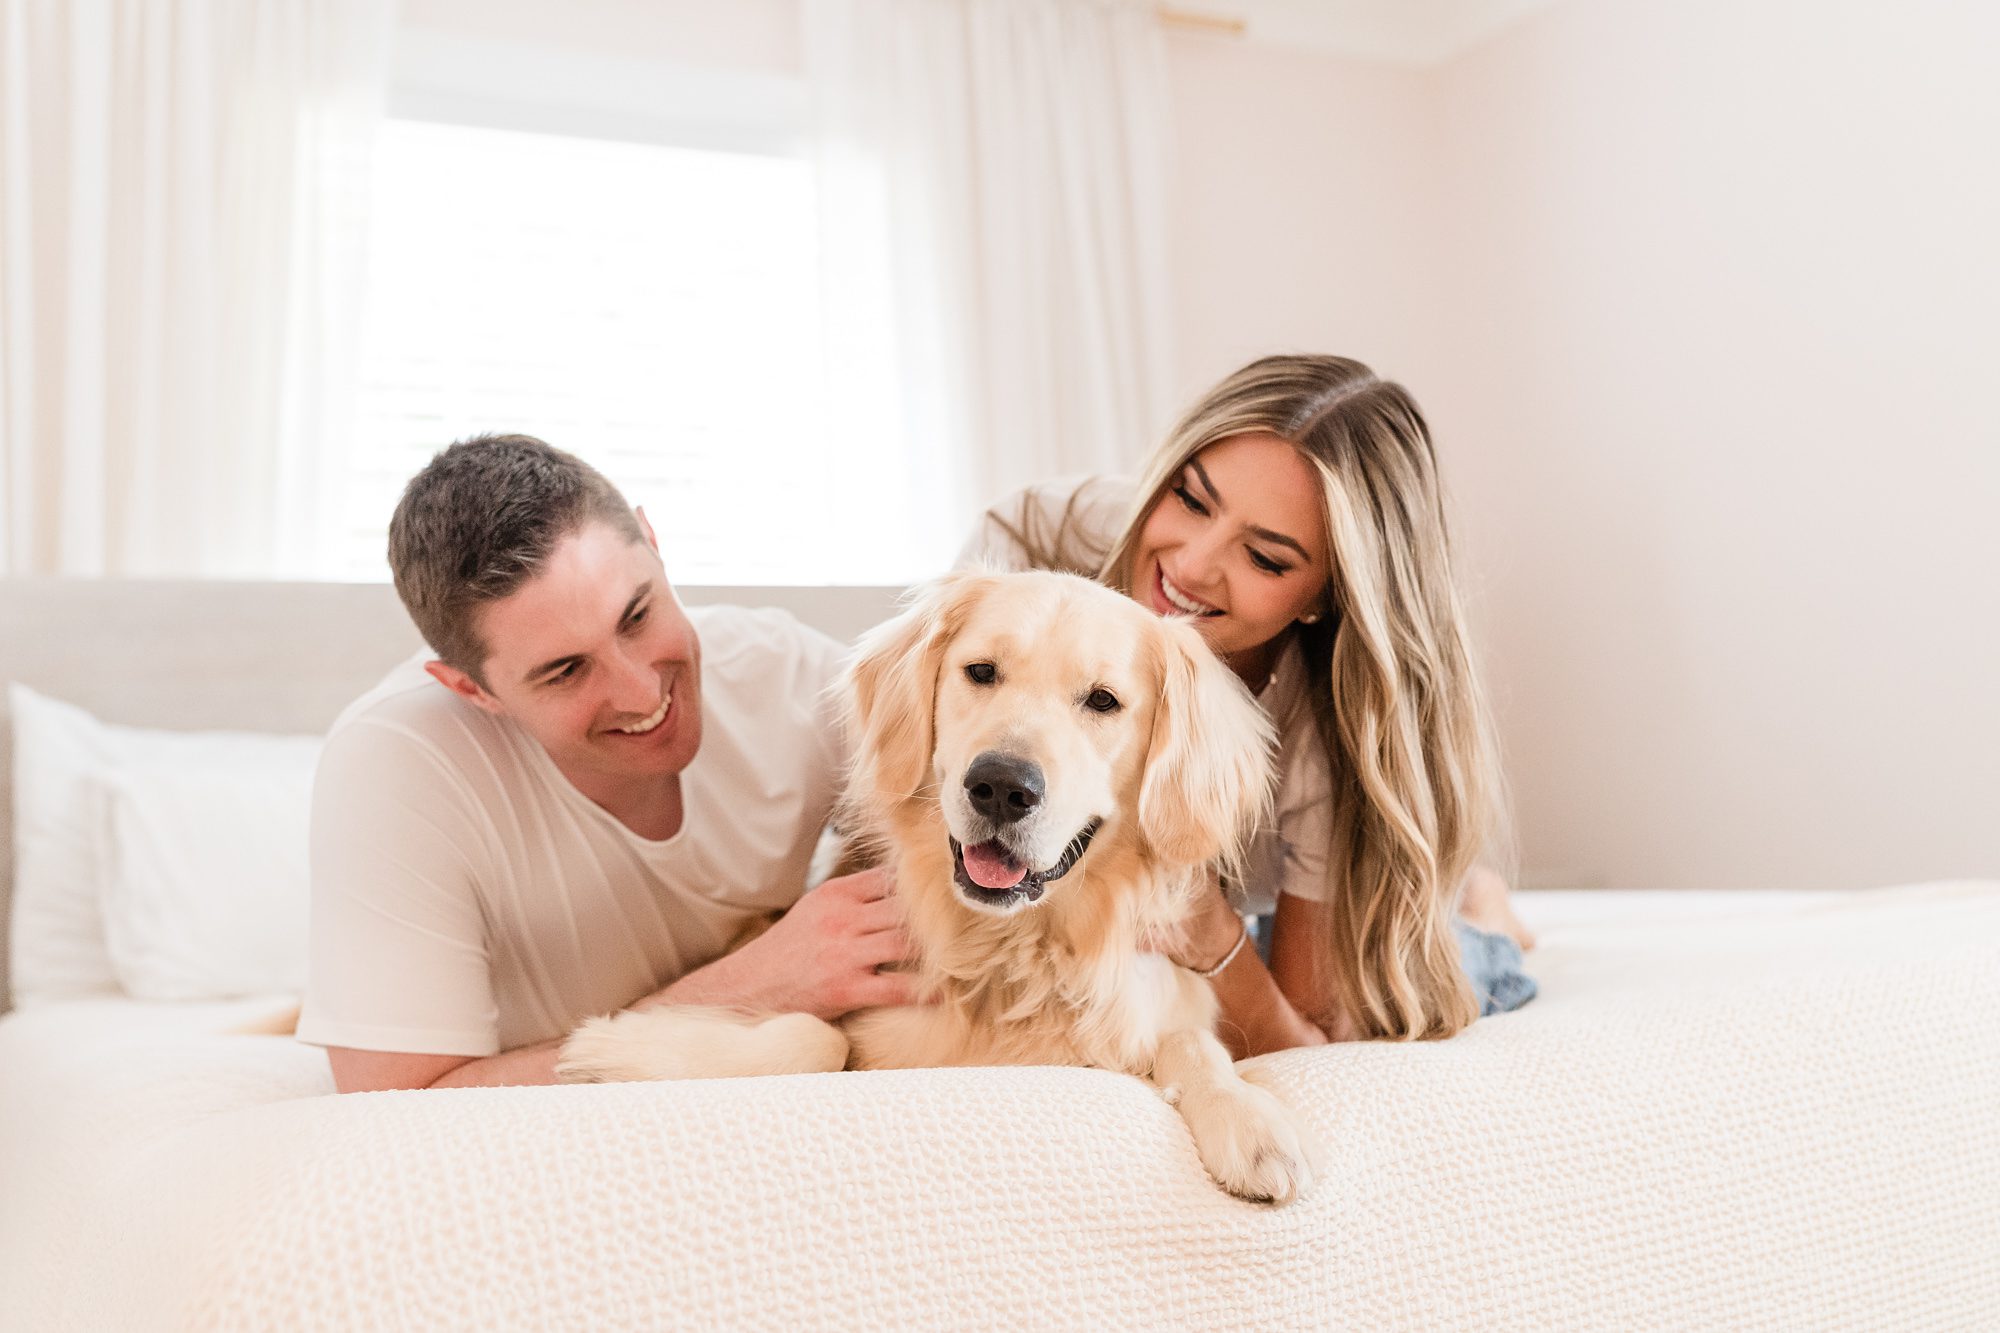 at home lifestyle engagement dog golden retriever